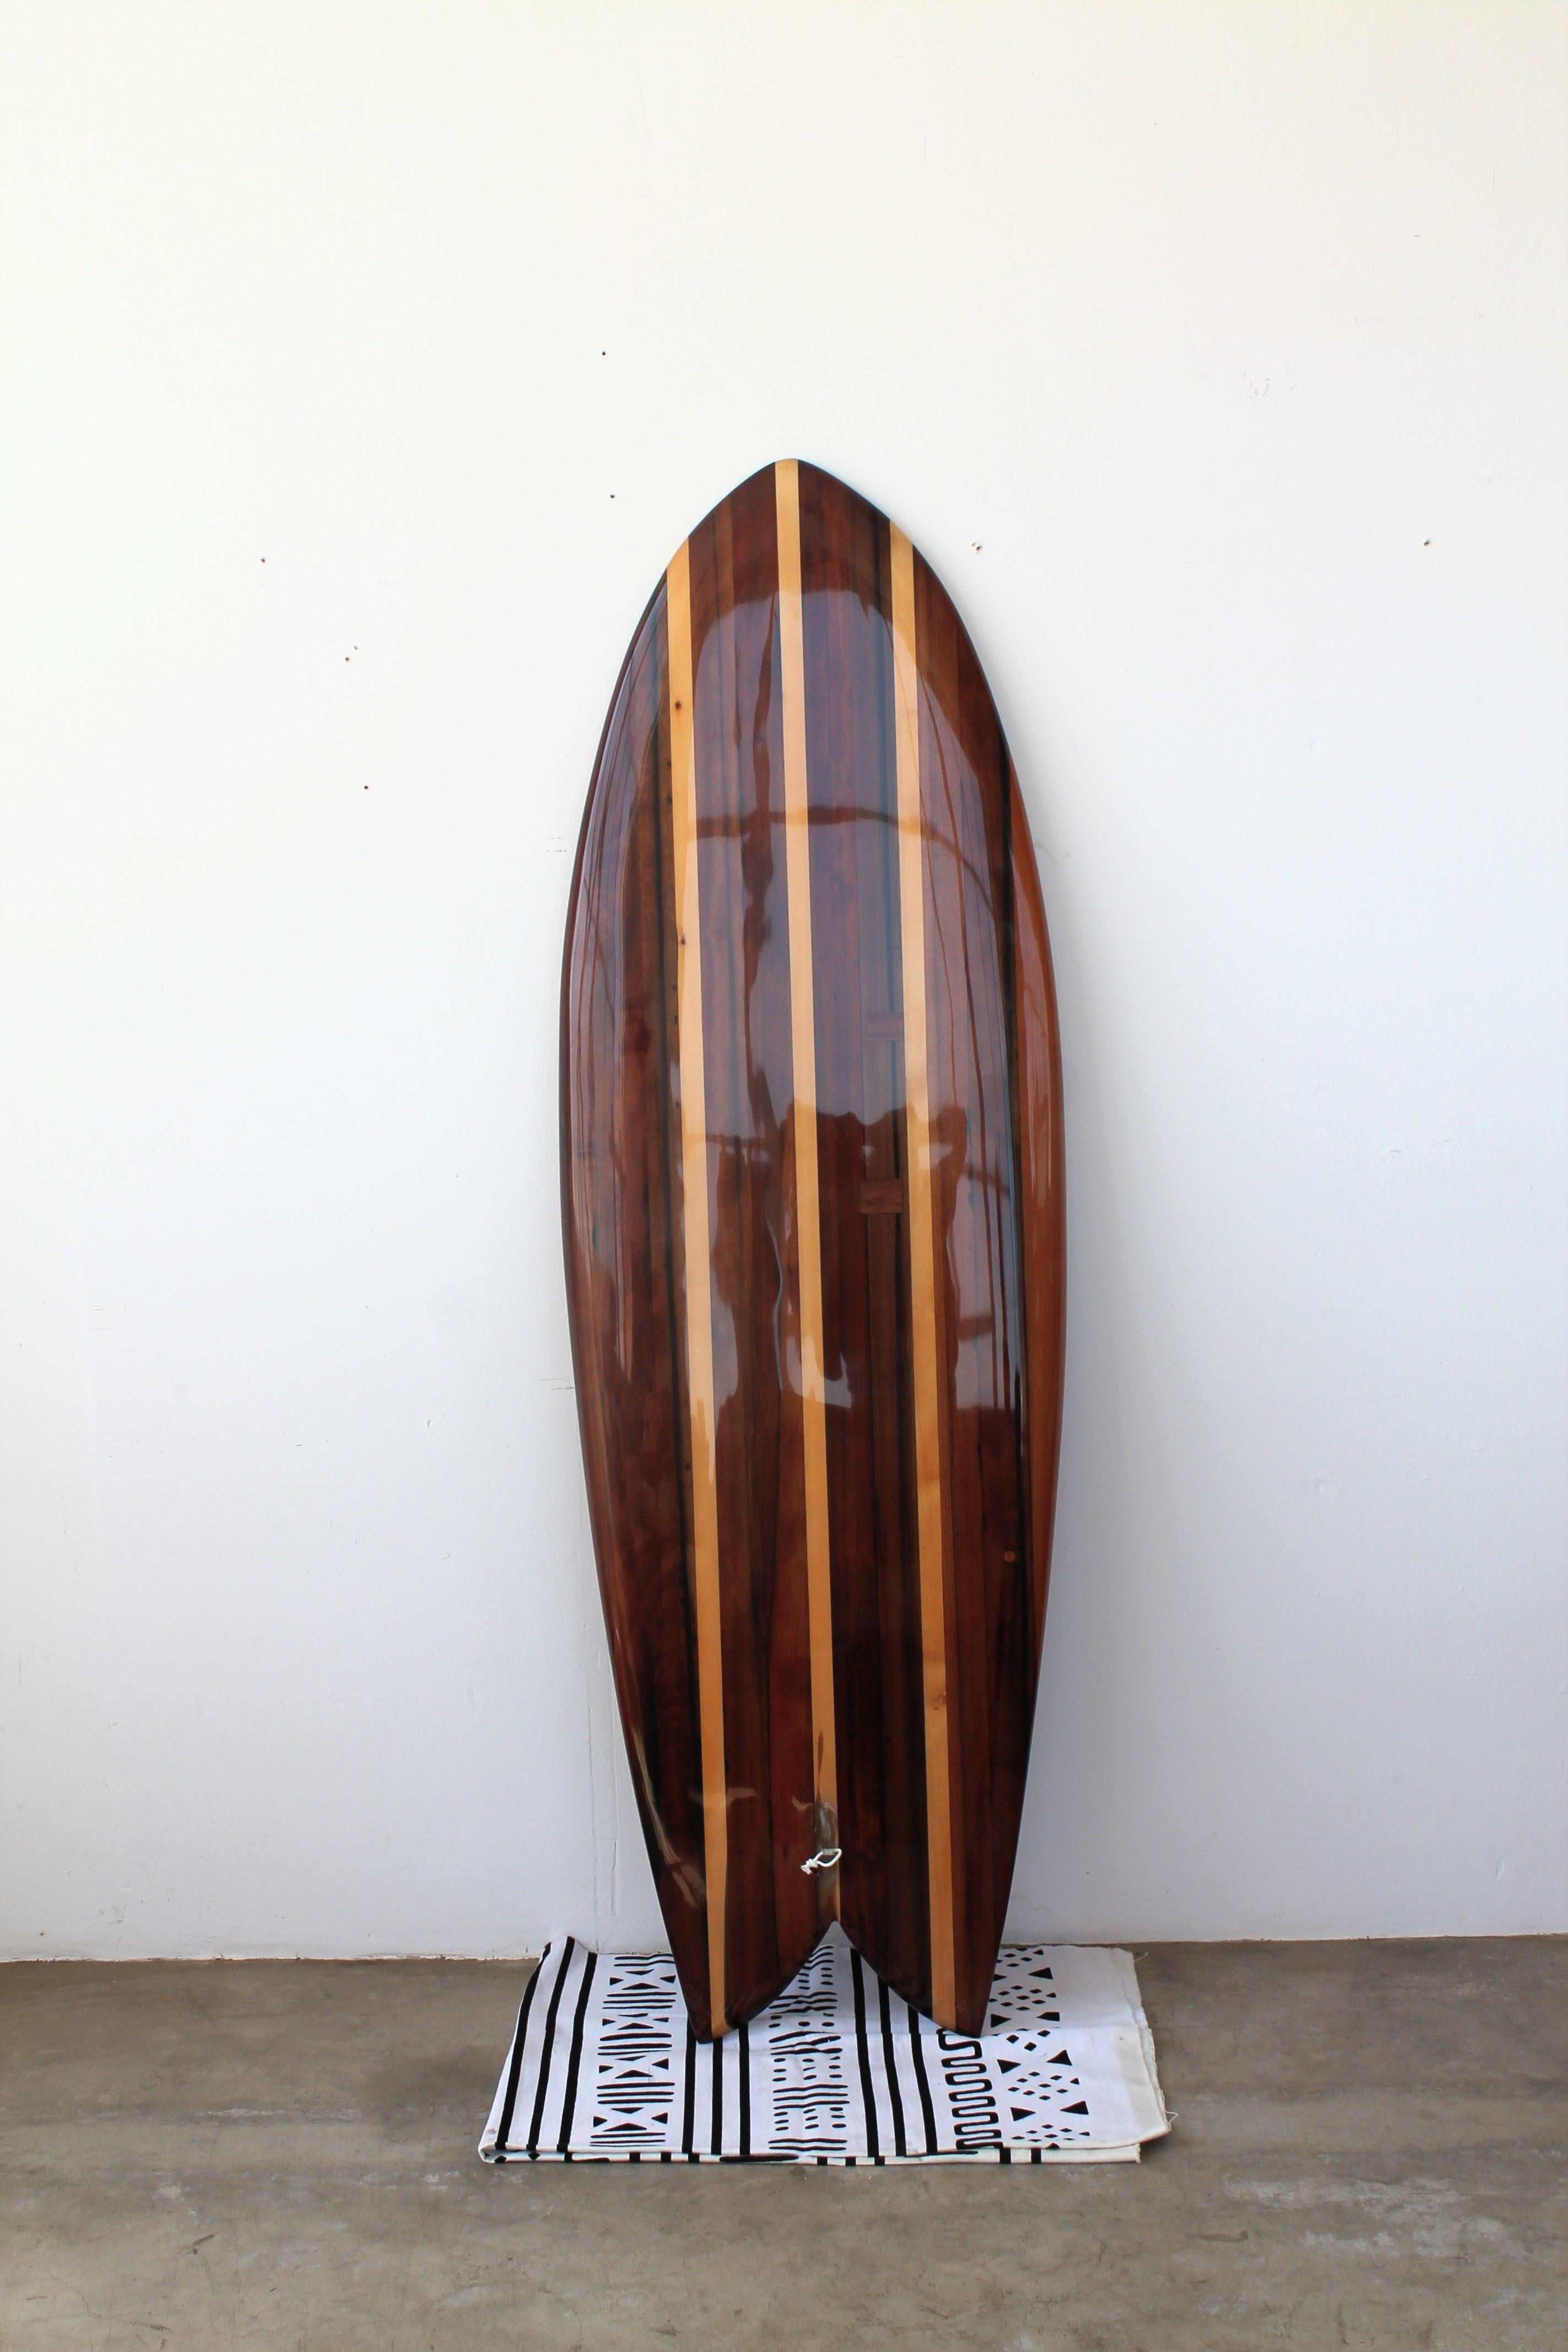 Being a surfer in New York City can be a bummer, but it does have its advantages. One that many overlook is the abundance of high quality lumber for surfboard building. Redwood is nearly impossible to come by on the east coast, however NYC and its